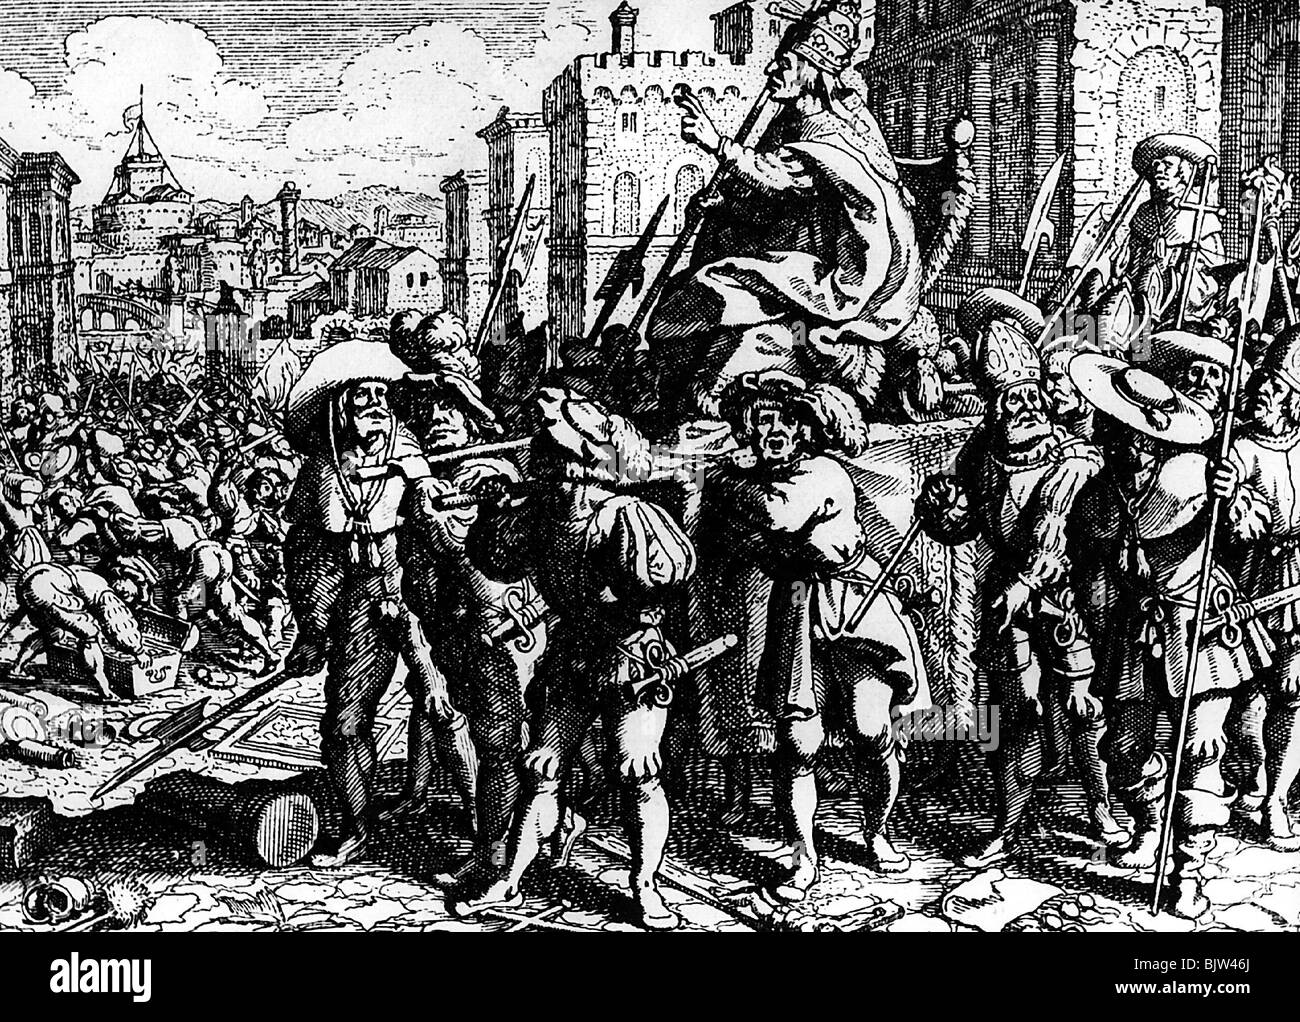 Italian Wars 1494 - 1559,  'Sacco di Roma', 1527, conquest by imperial troops, German lansquenets ridiculing the pope, copper engraving, chronicle by Gottfried, Frankfurt, 1619, Stock Photo